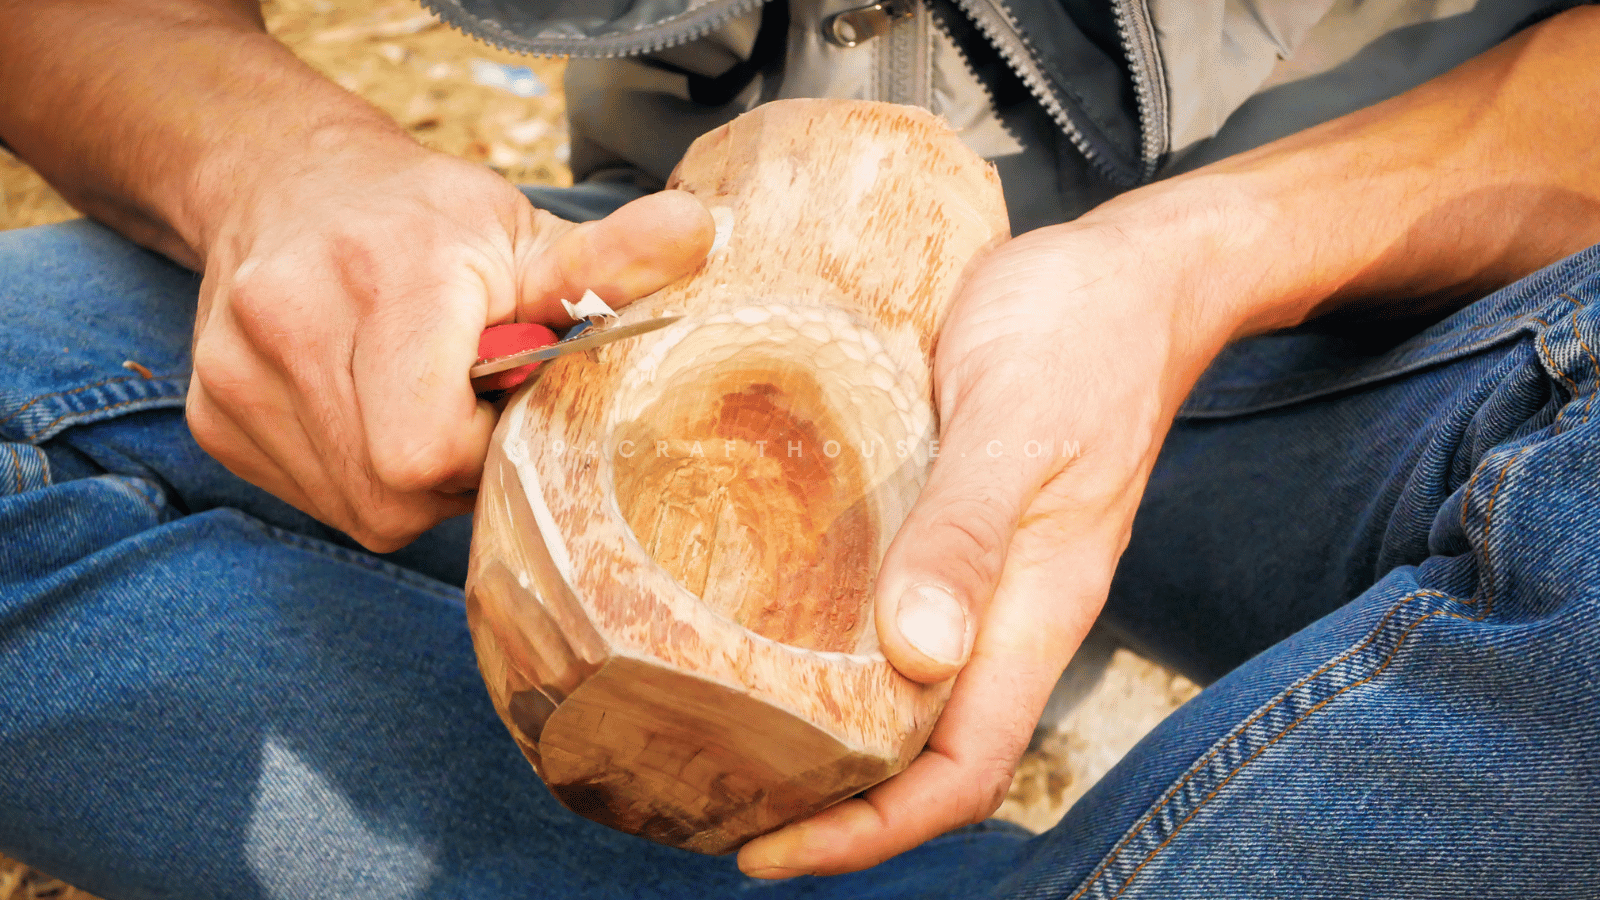 Skilled artisans create unique designs and patterns, turning each Kuksa into a work of art.